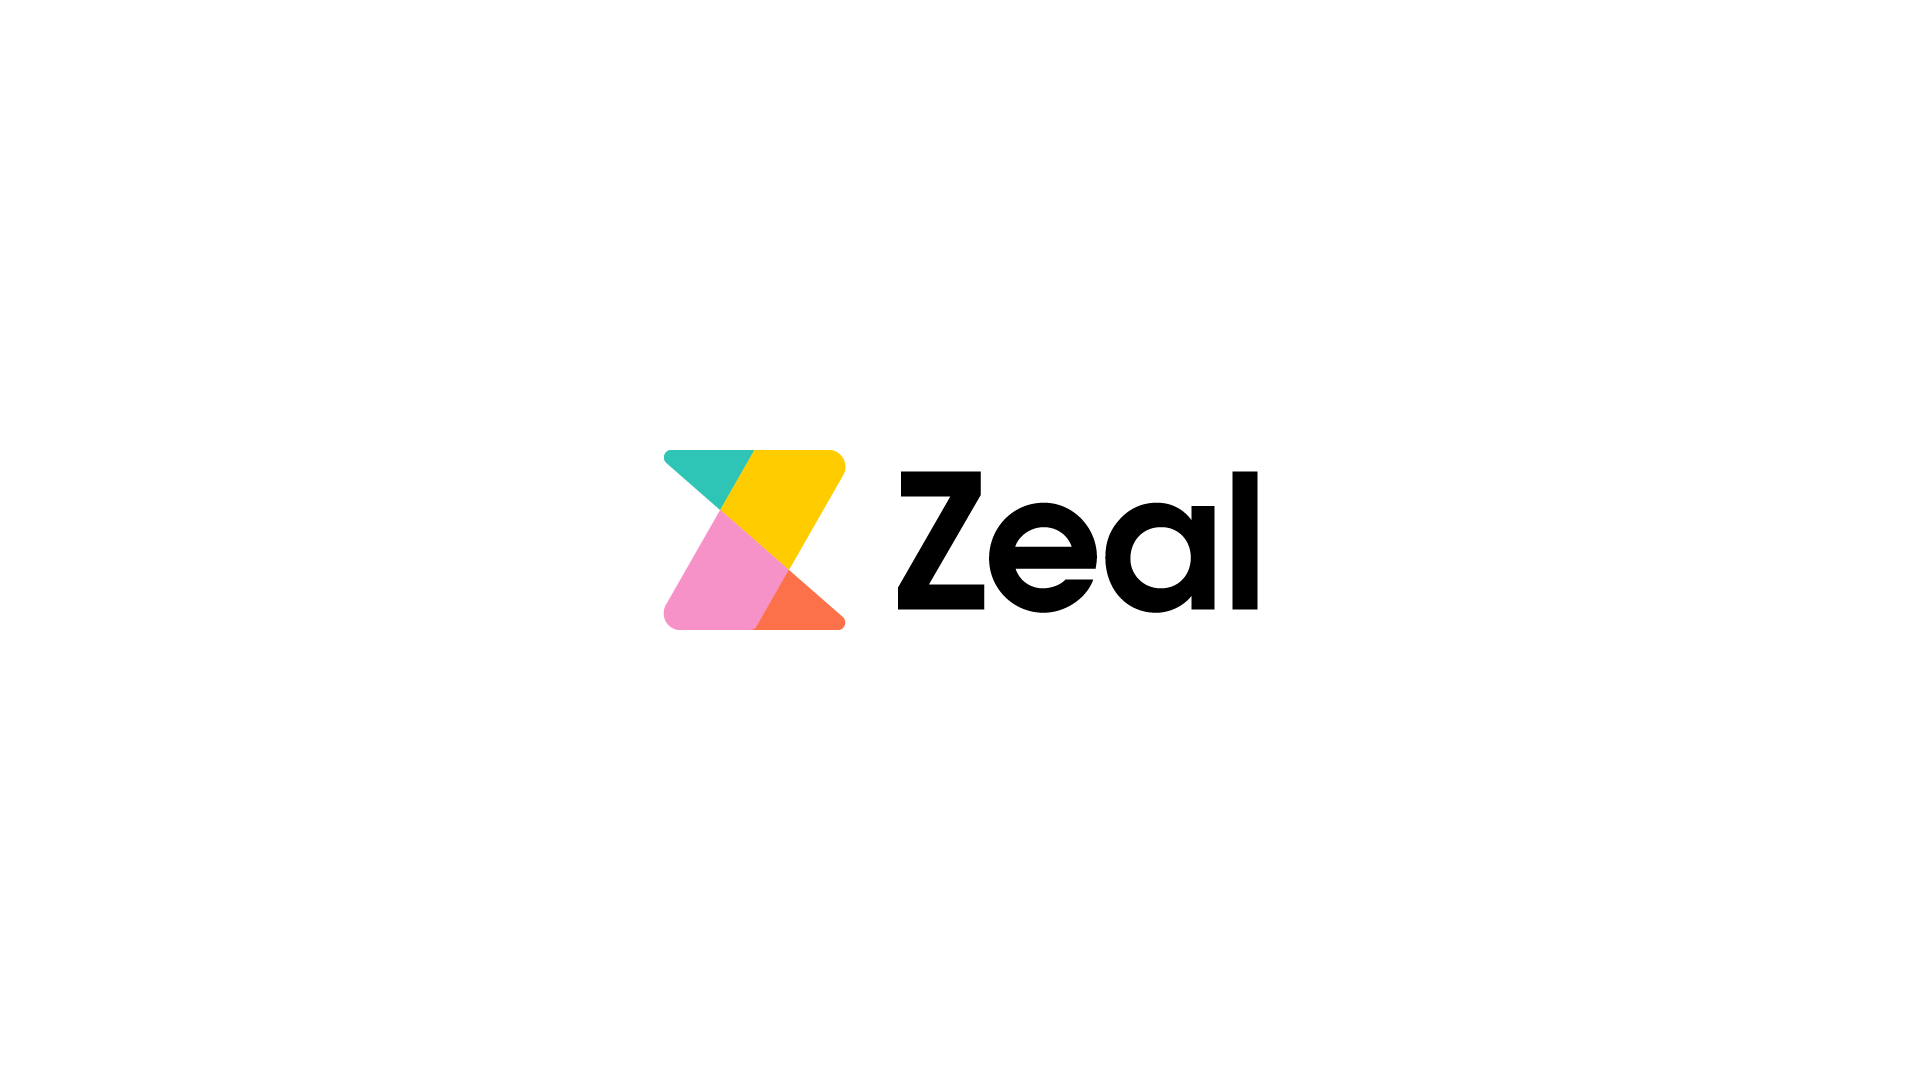 Mental Well-being App logo, colorful 'Z' letter design, symbolizing positivity and vibrant mental health